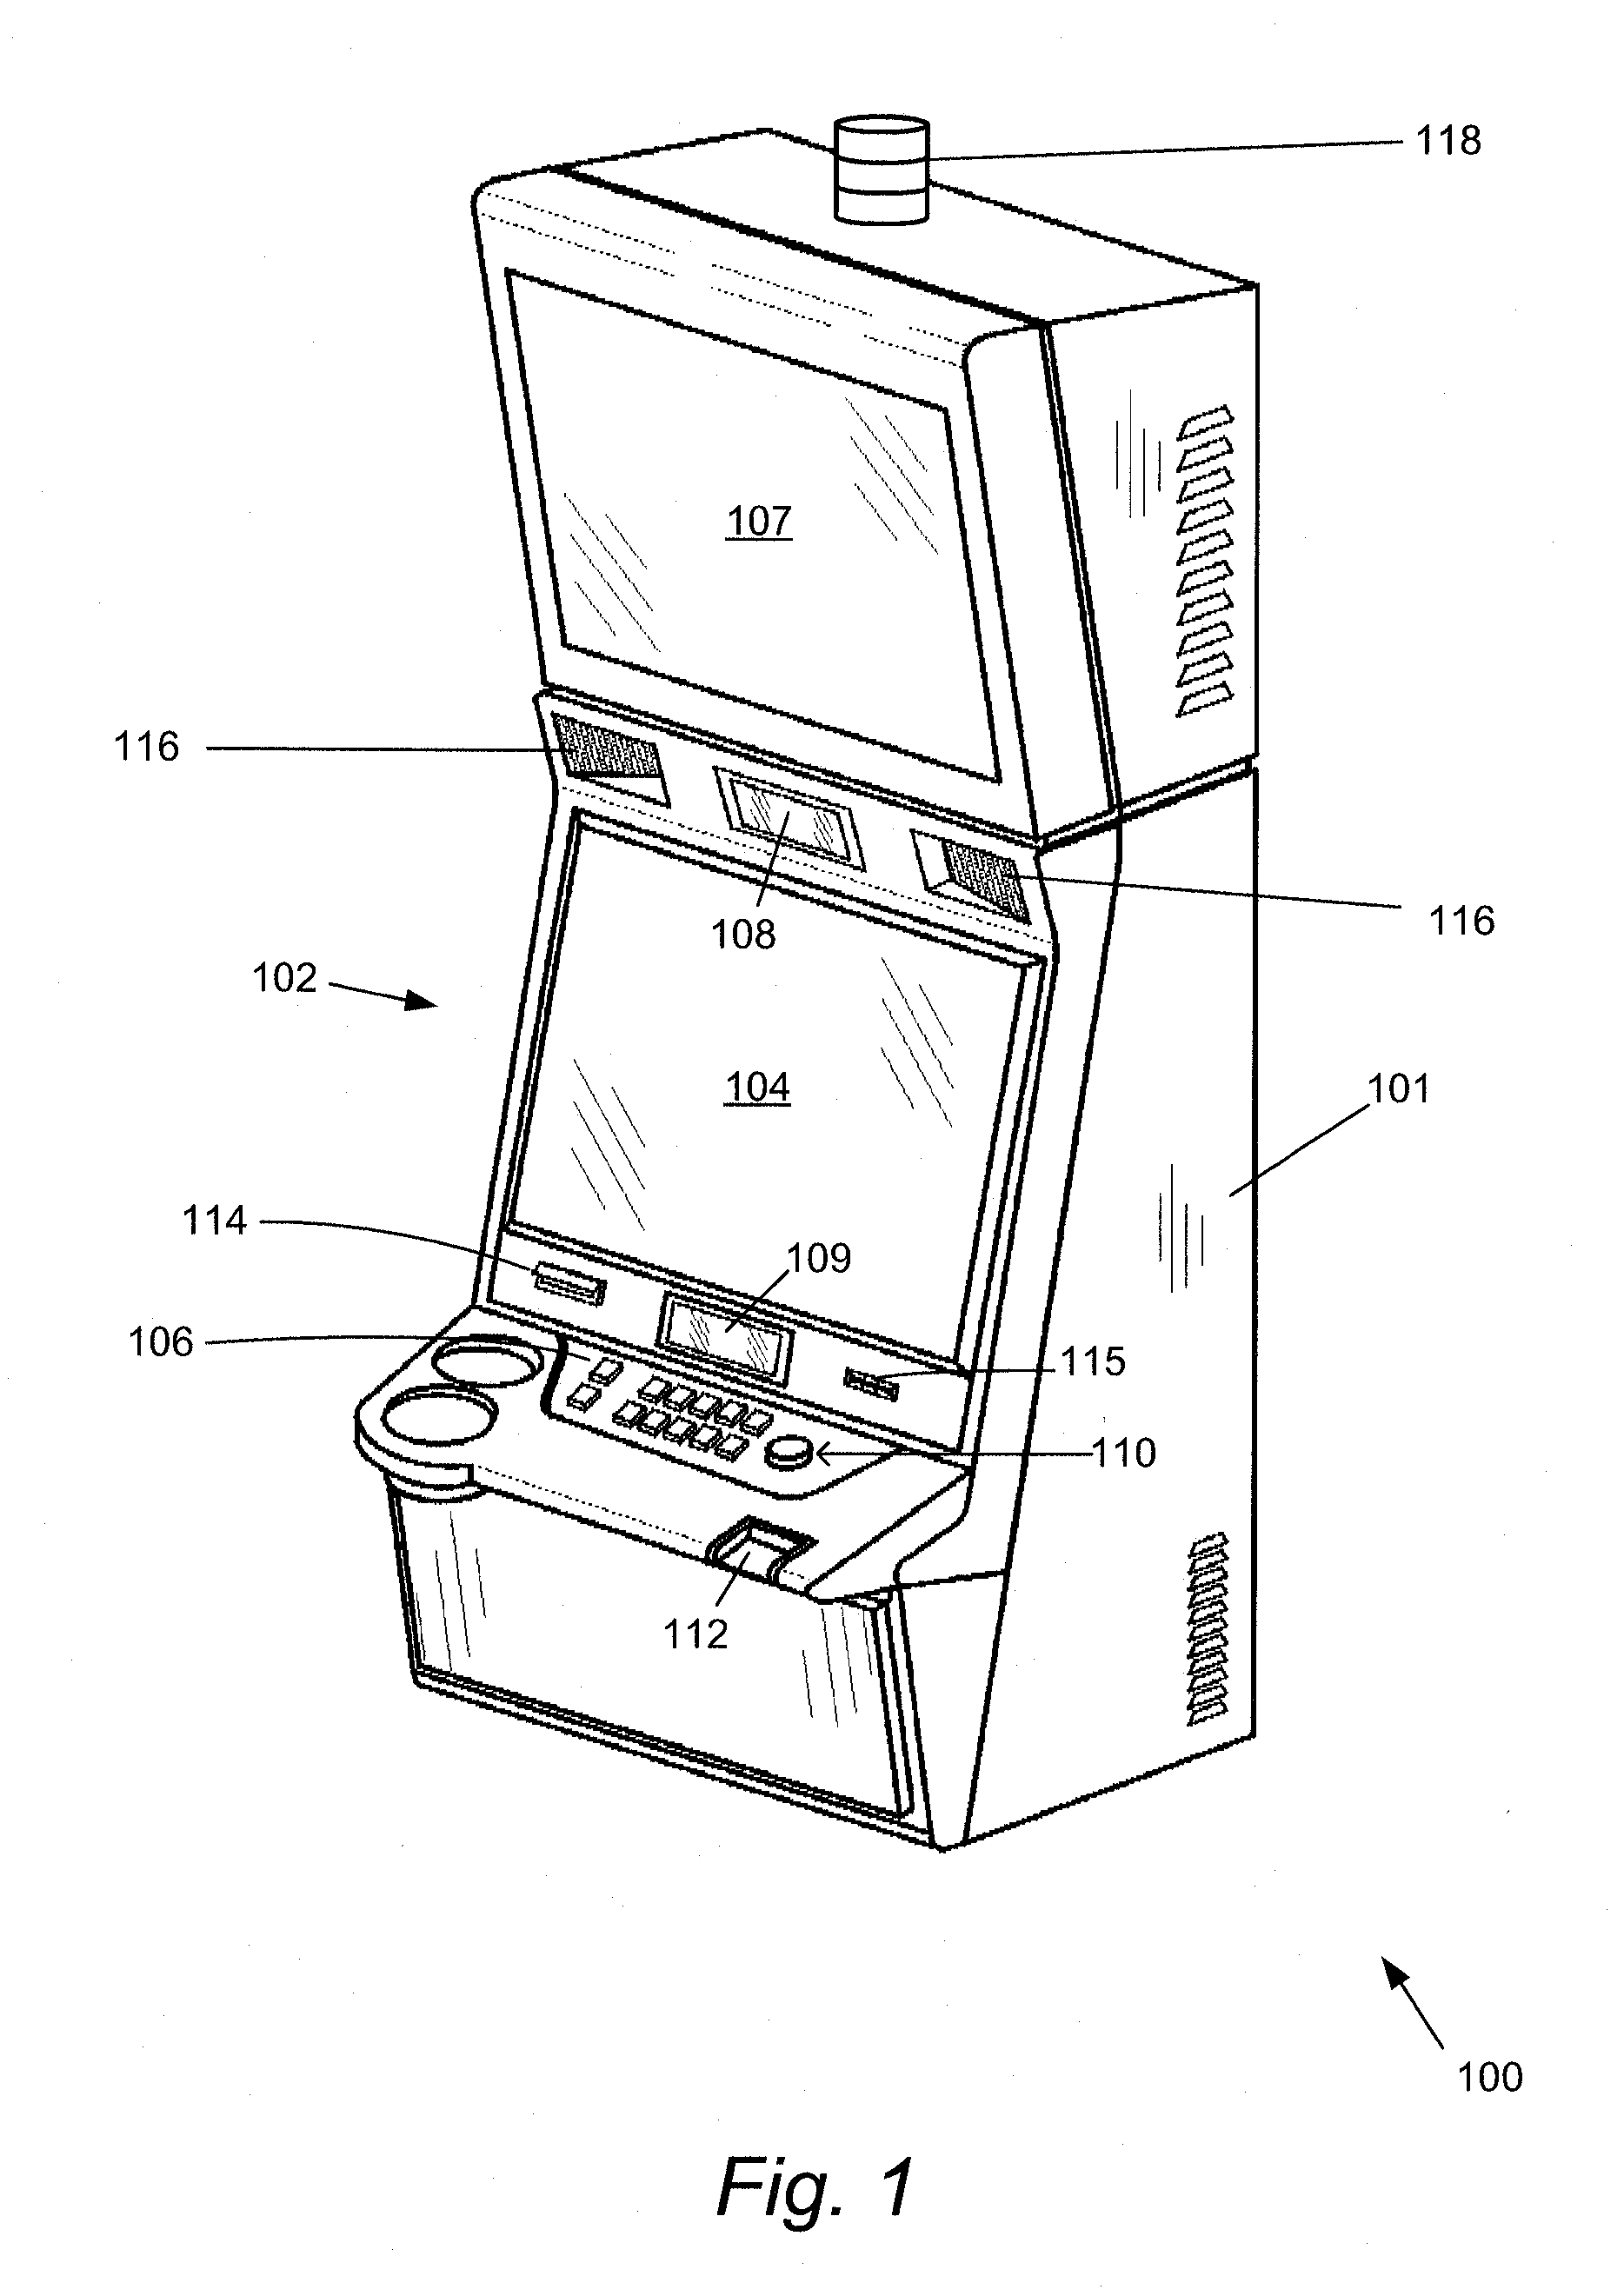 Method, apparatus, and program product for producing and applying a graphic simulation across multiple gaming machines